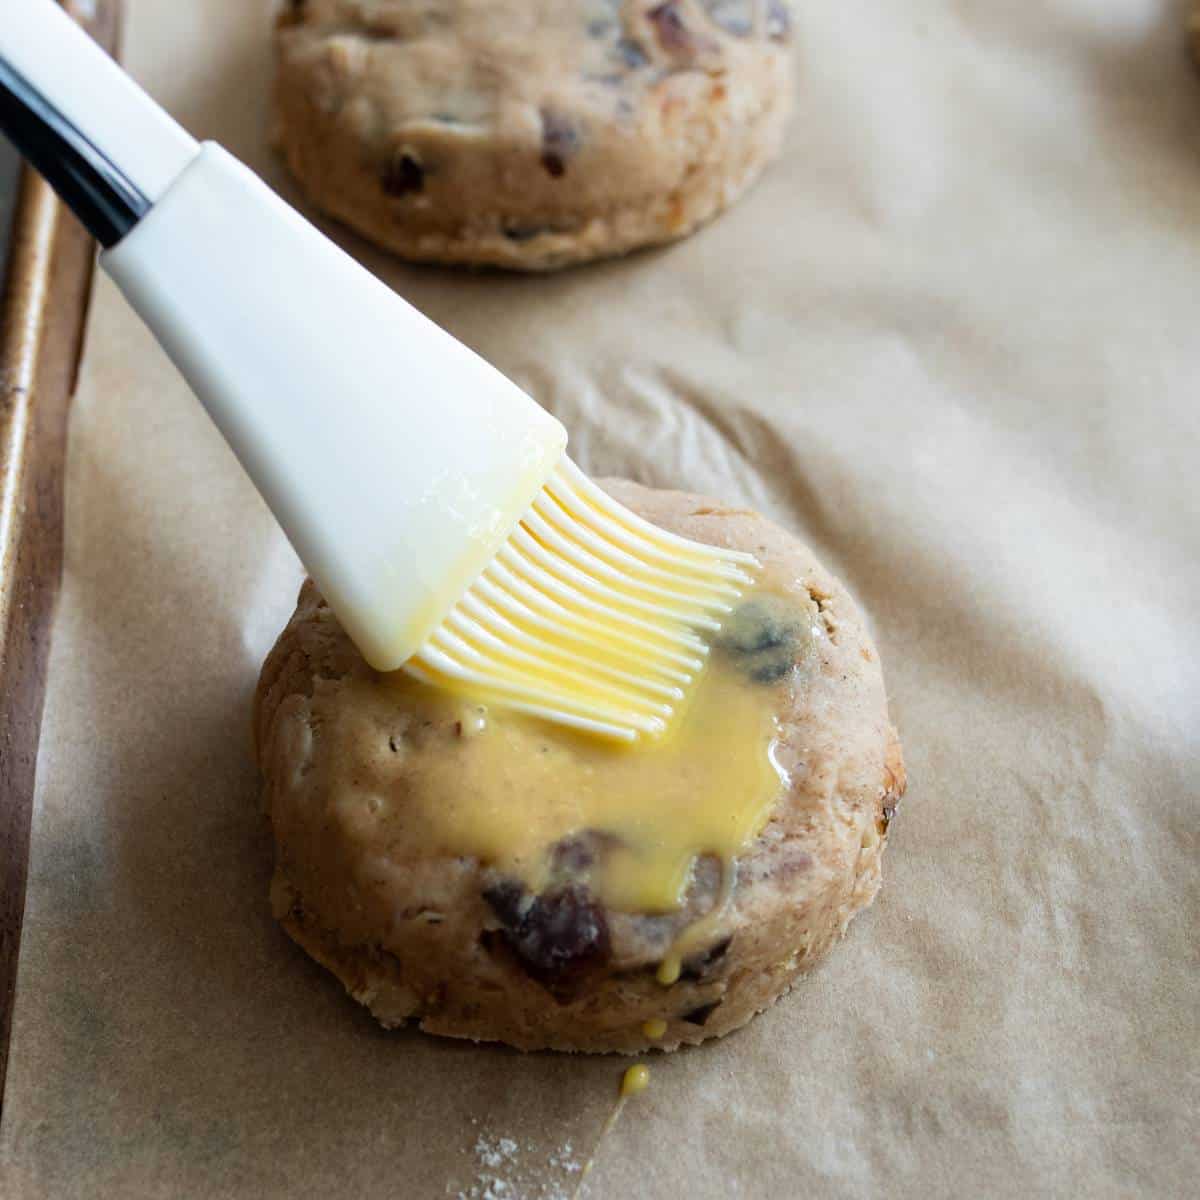 A brush adds egg wash to a scone round on a baking sheet of dough rounds before going into the oven.